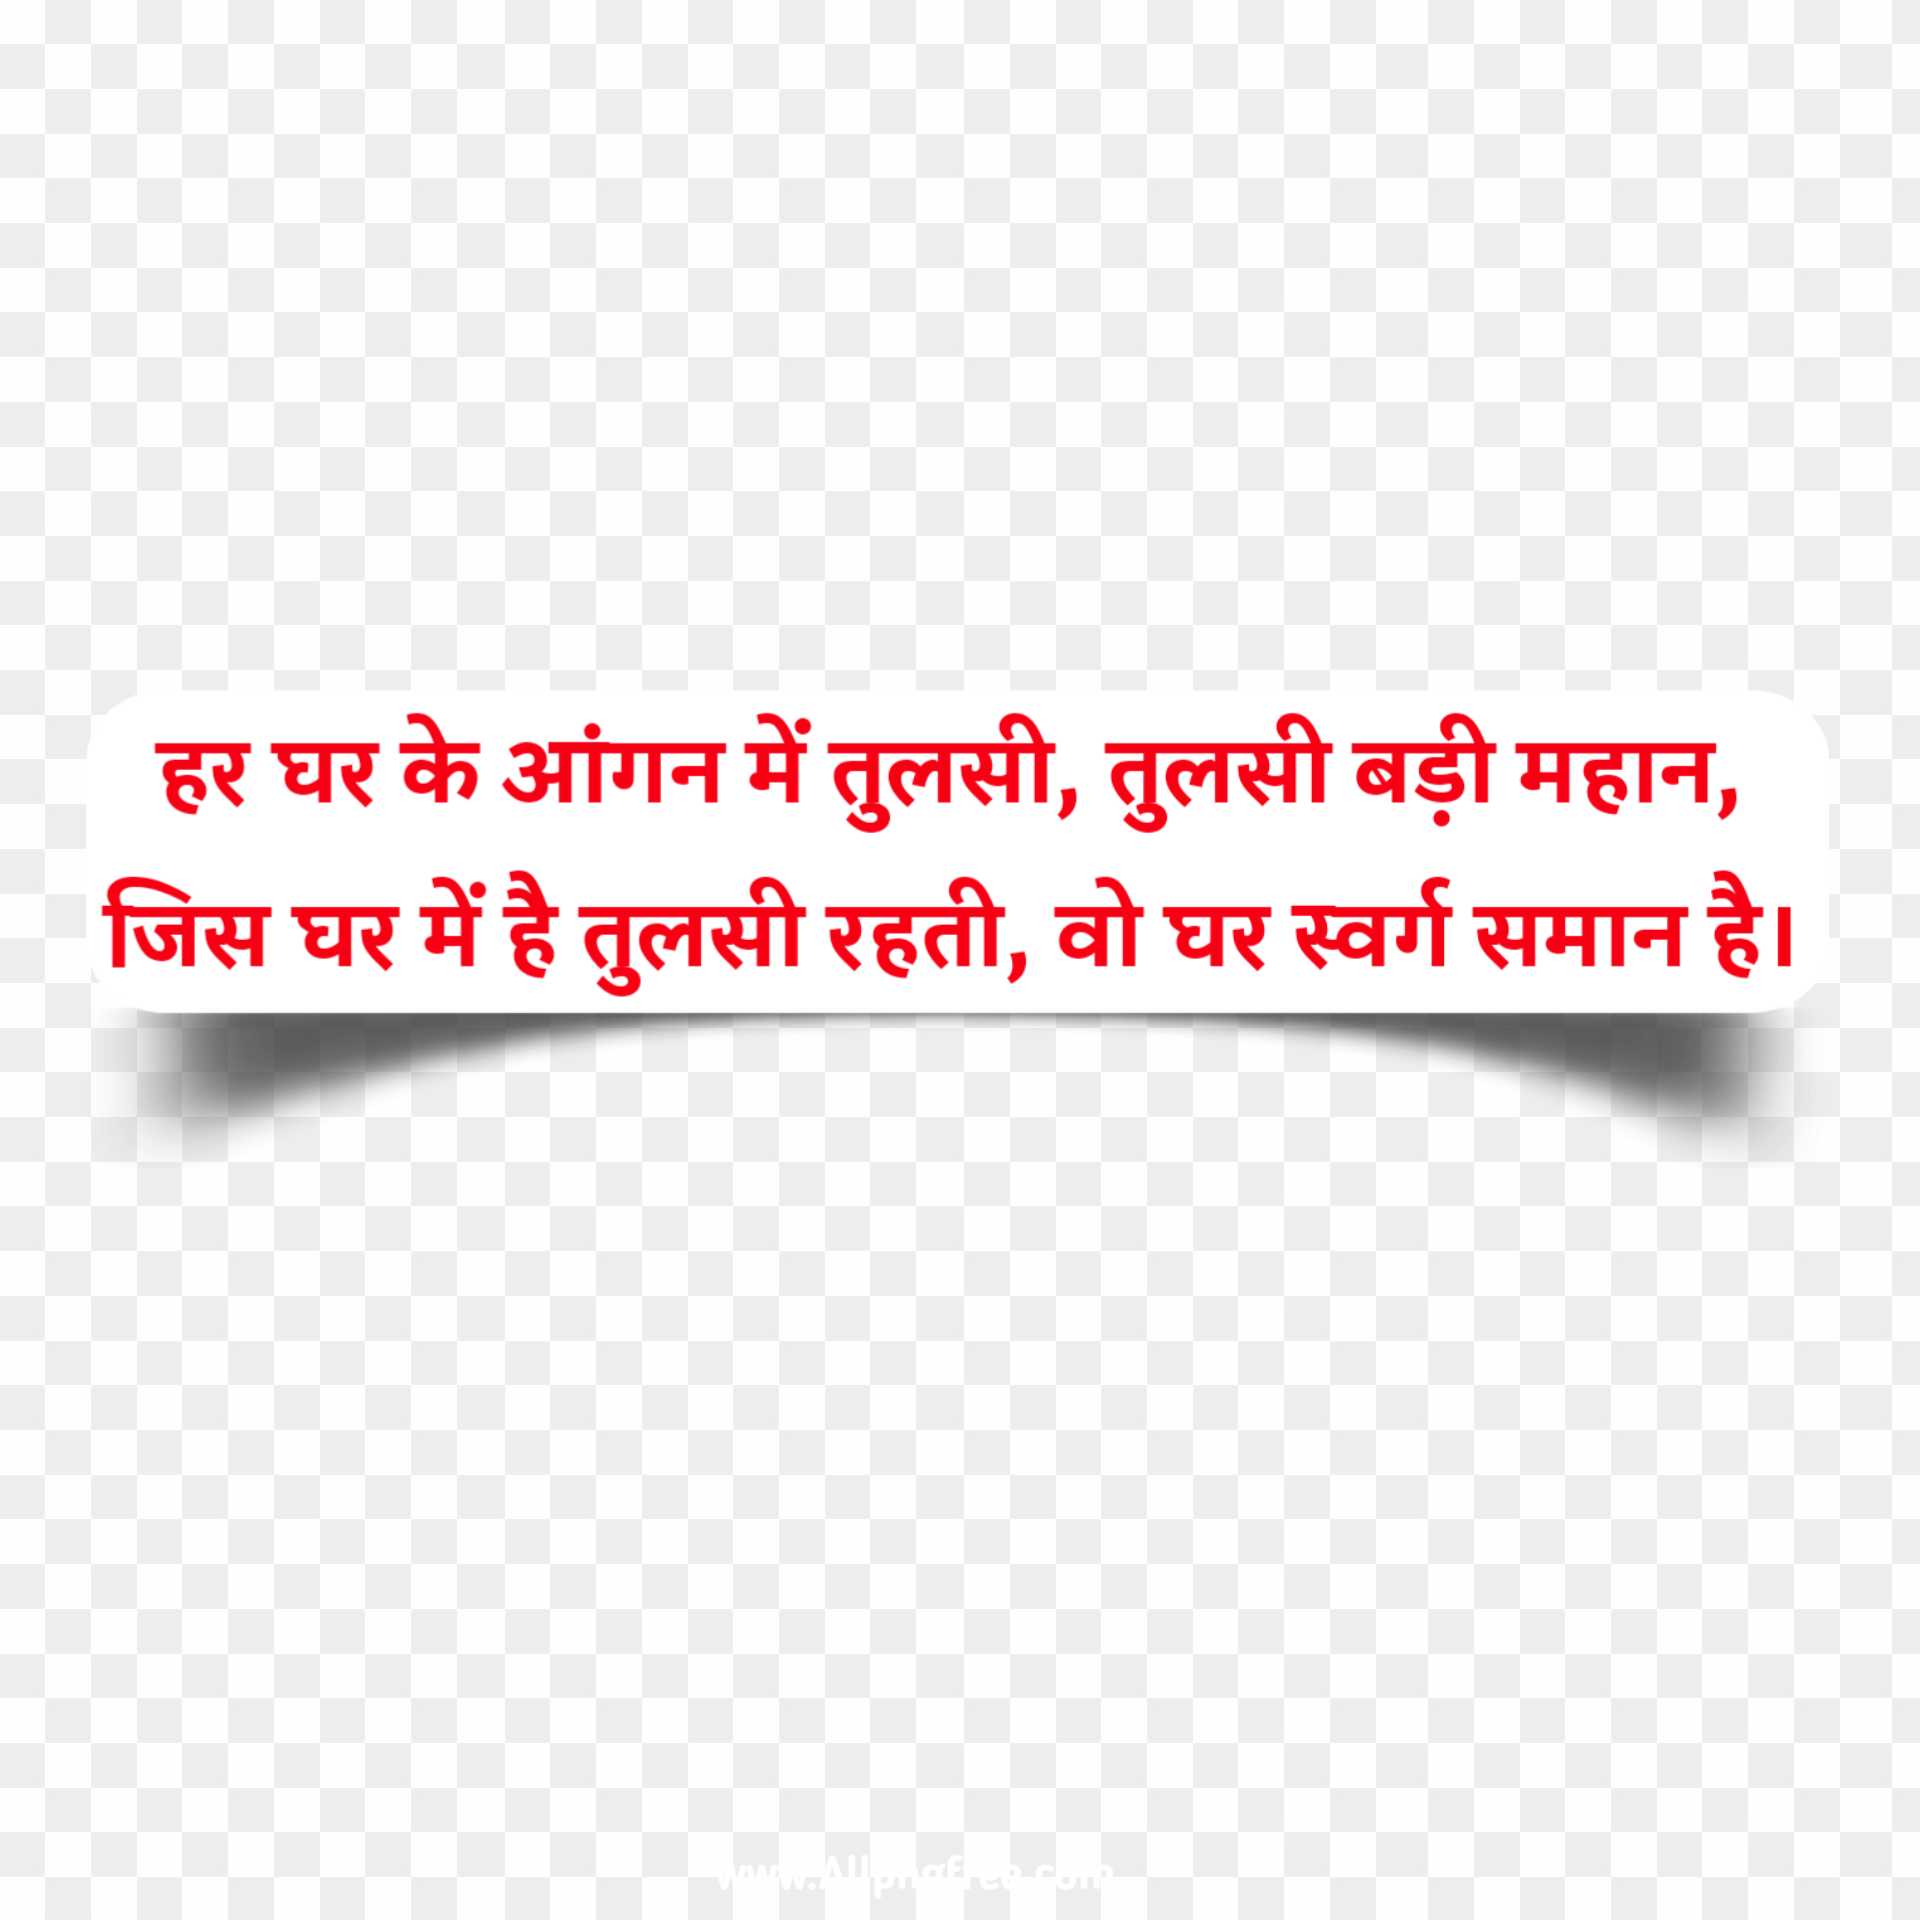 Tulsi quotes in Hindi images 